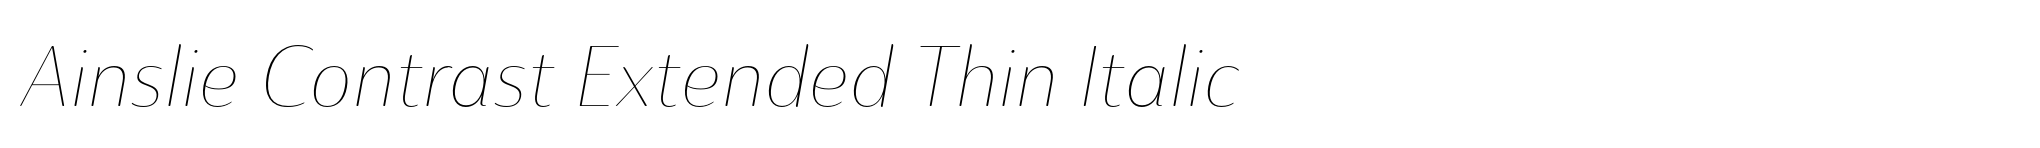 Ainslie Contrast Extended Thin Italic image